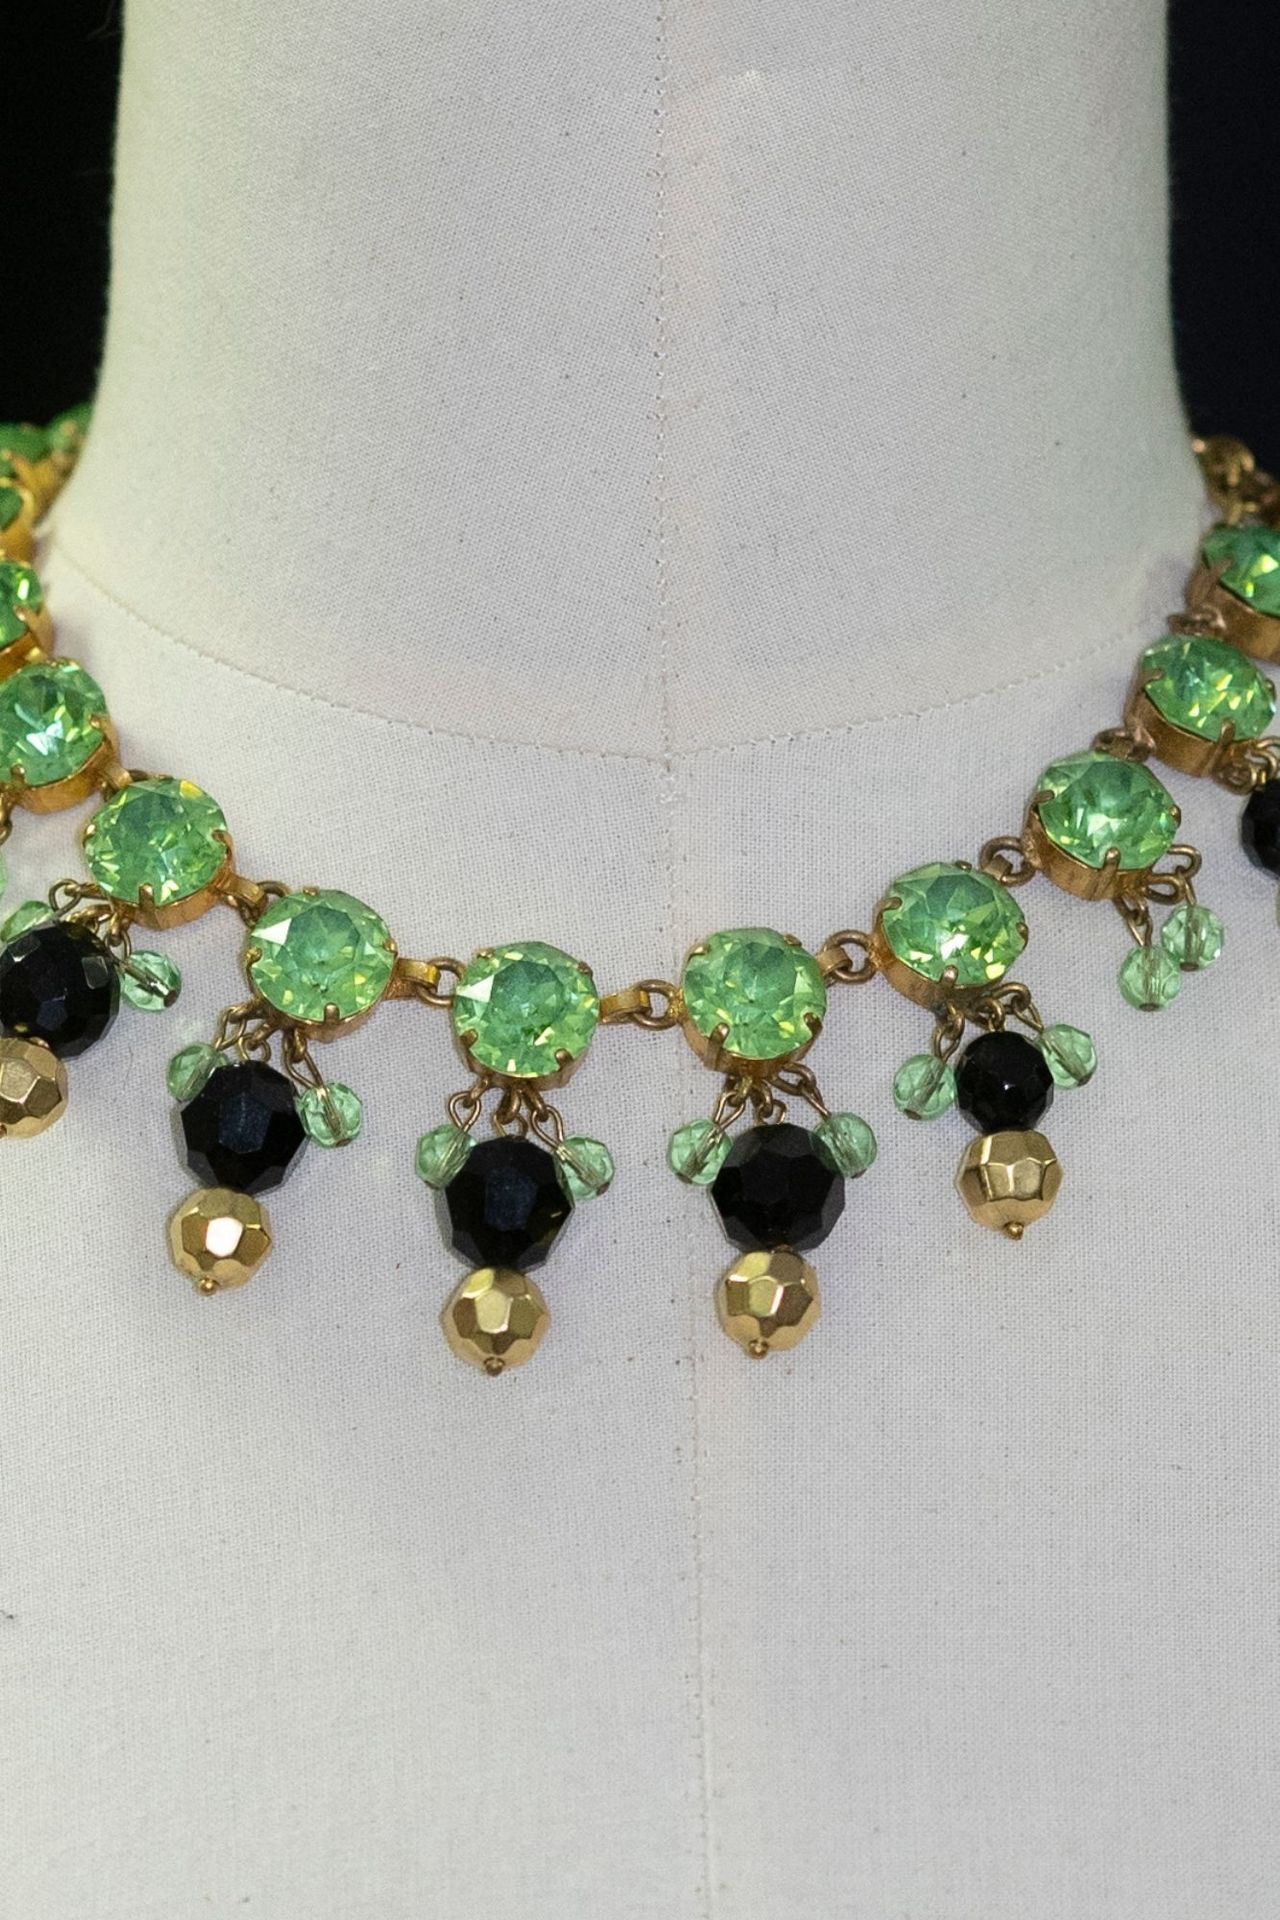 COLLIER "PRINCESSE" Necklace made from a Goossens necklace embellished with gree&hellip;